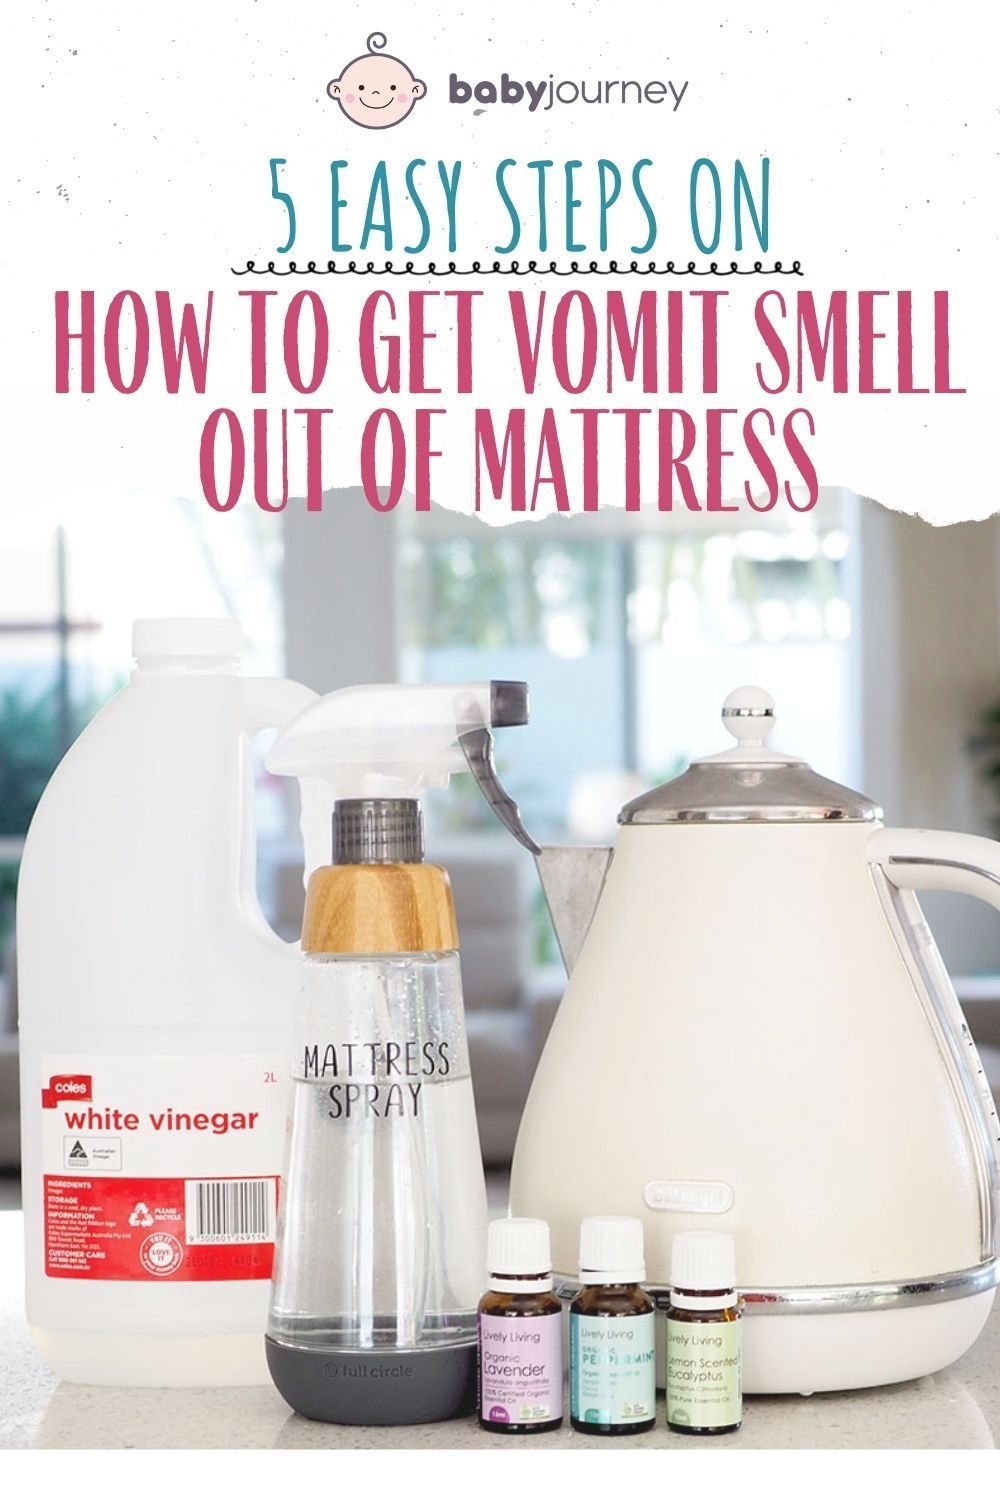 5 Easy Steps on How to Get Vomit Smell Out of Mattress